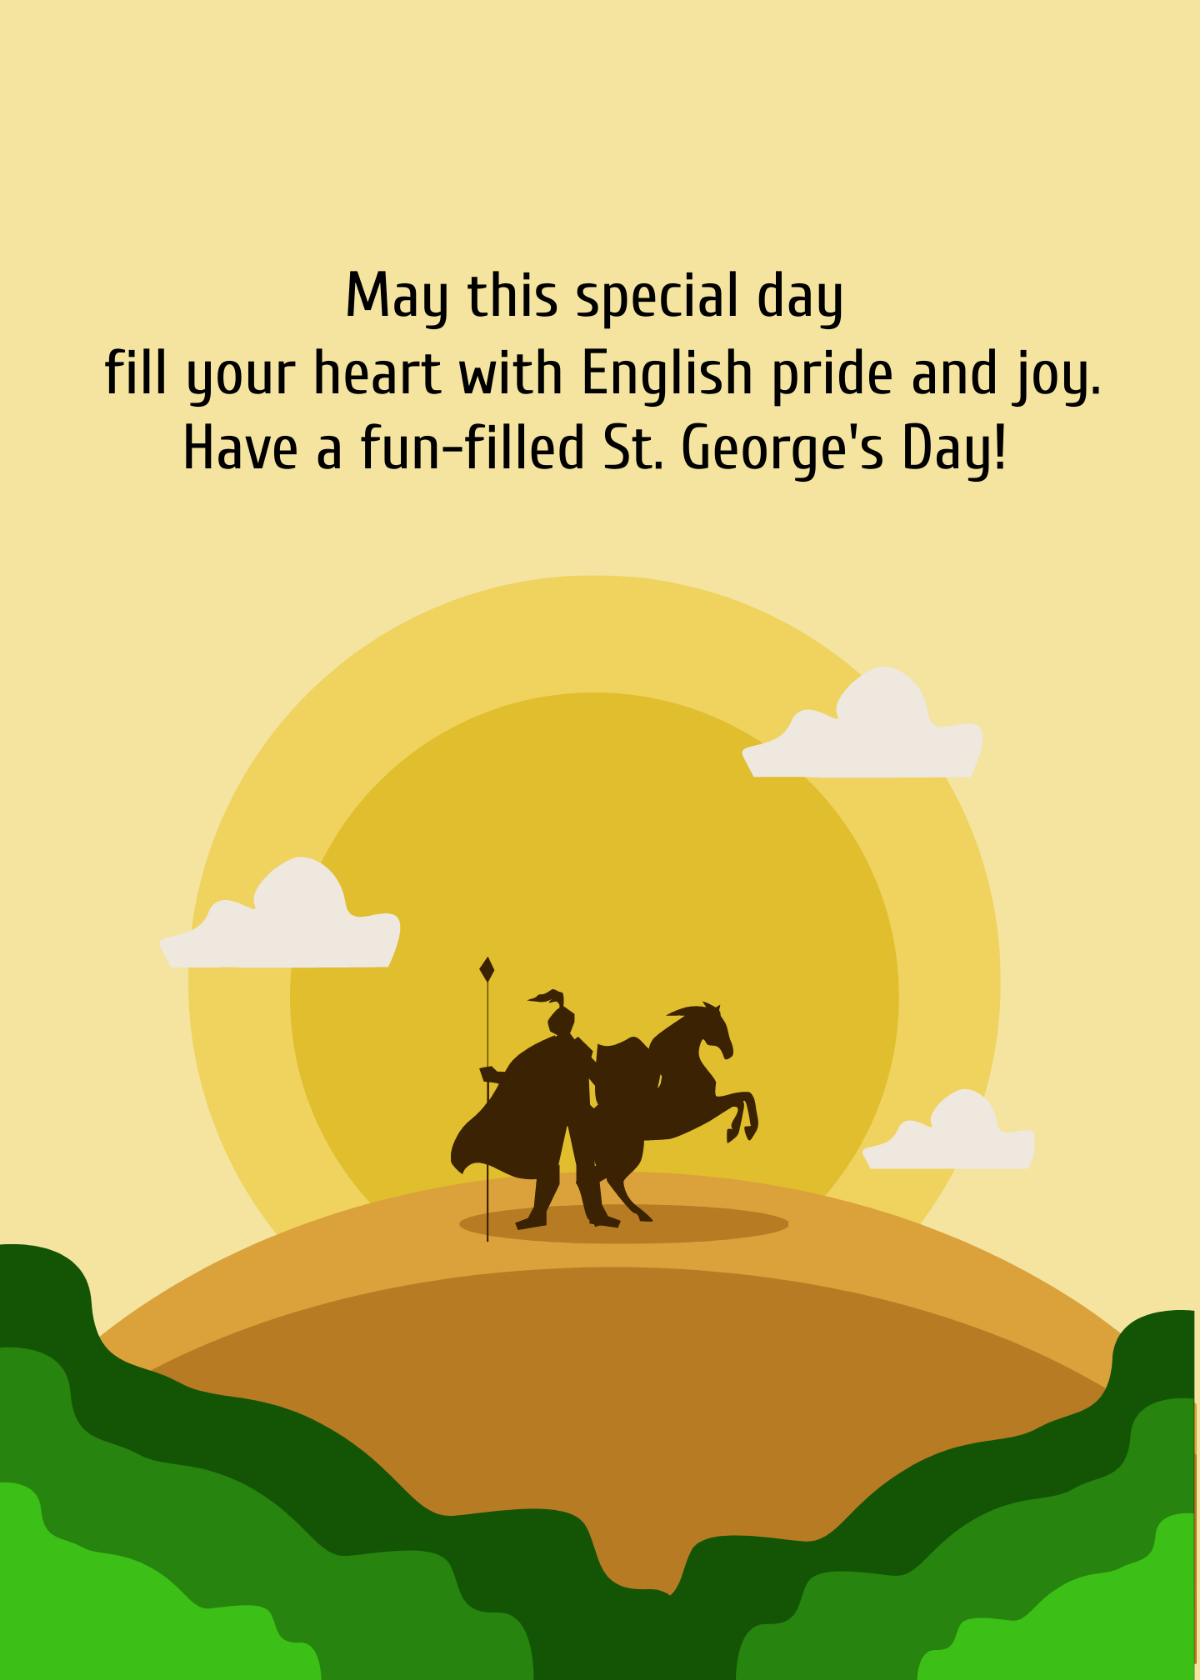 St. George's Day Greeting Card